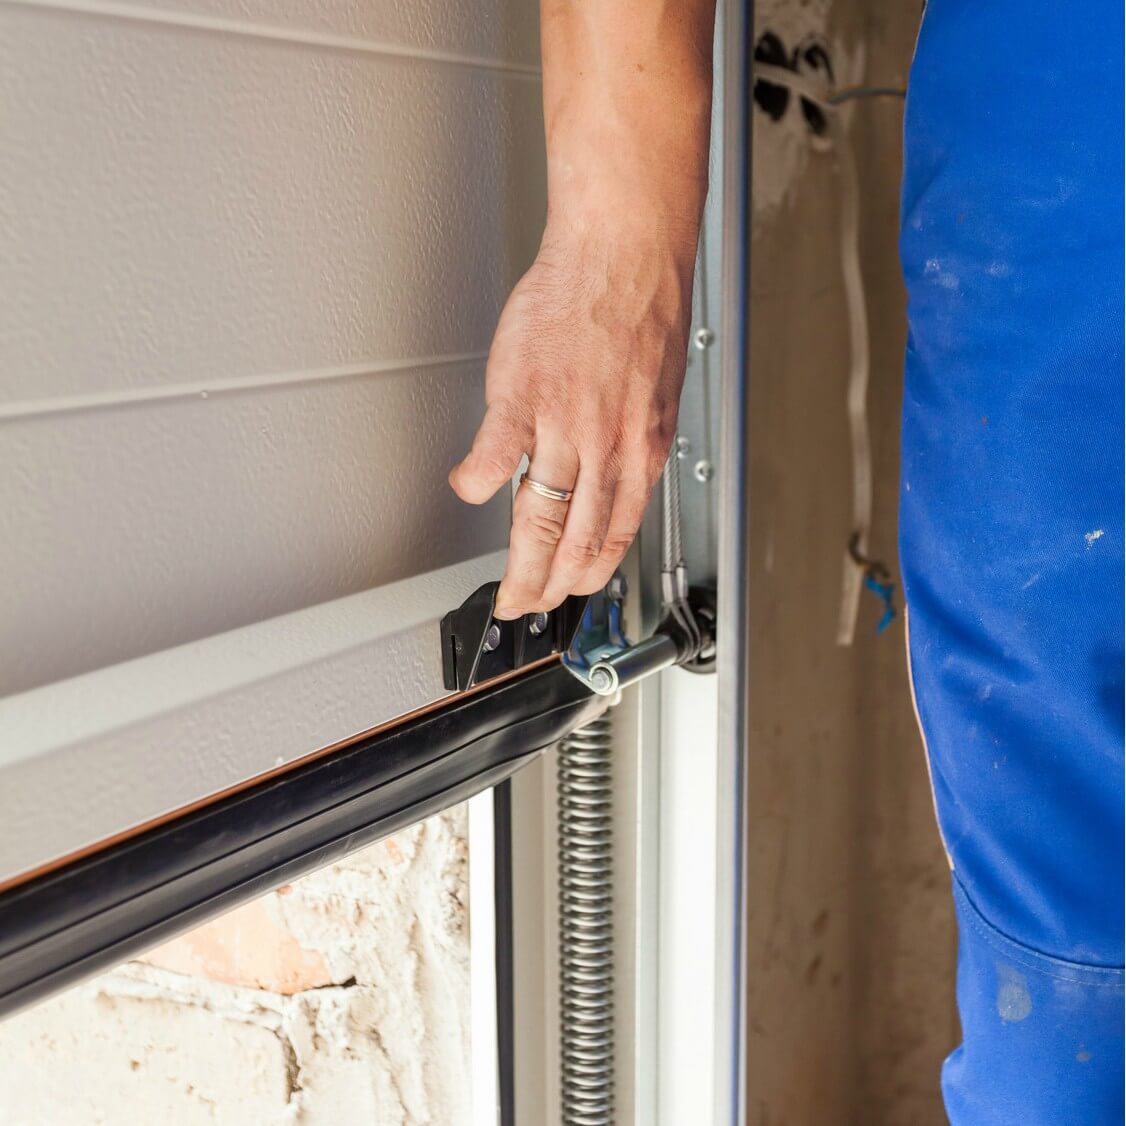 Save Engery With Garage Door Weather Seal Replacement - Garage Door Weather Seal Services Pros On Call